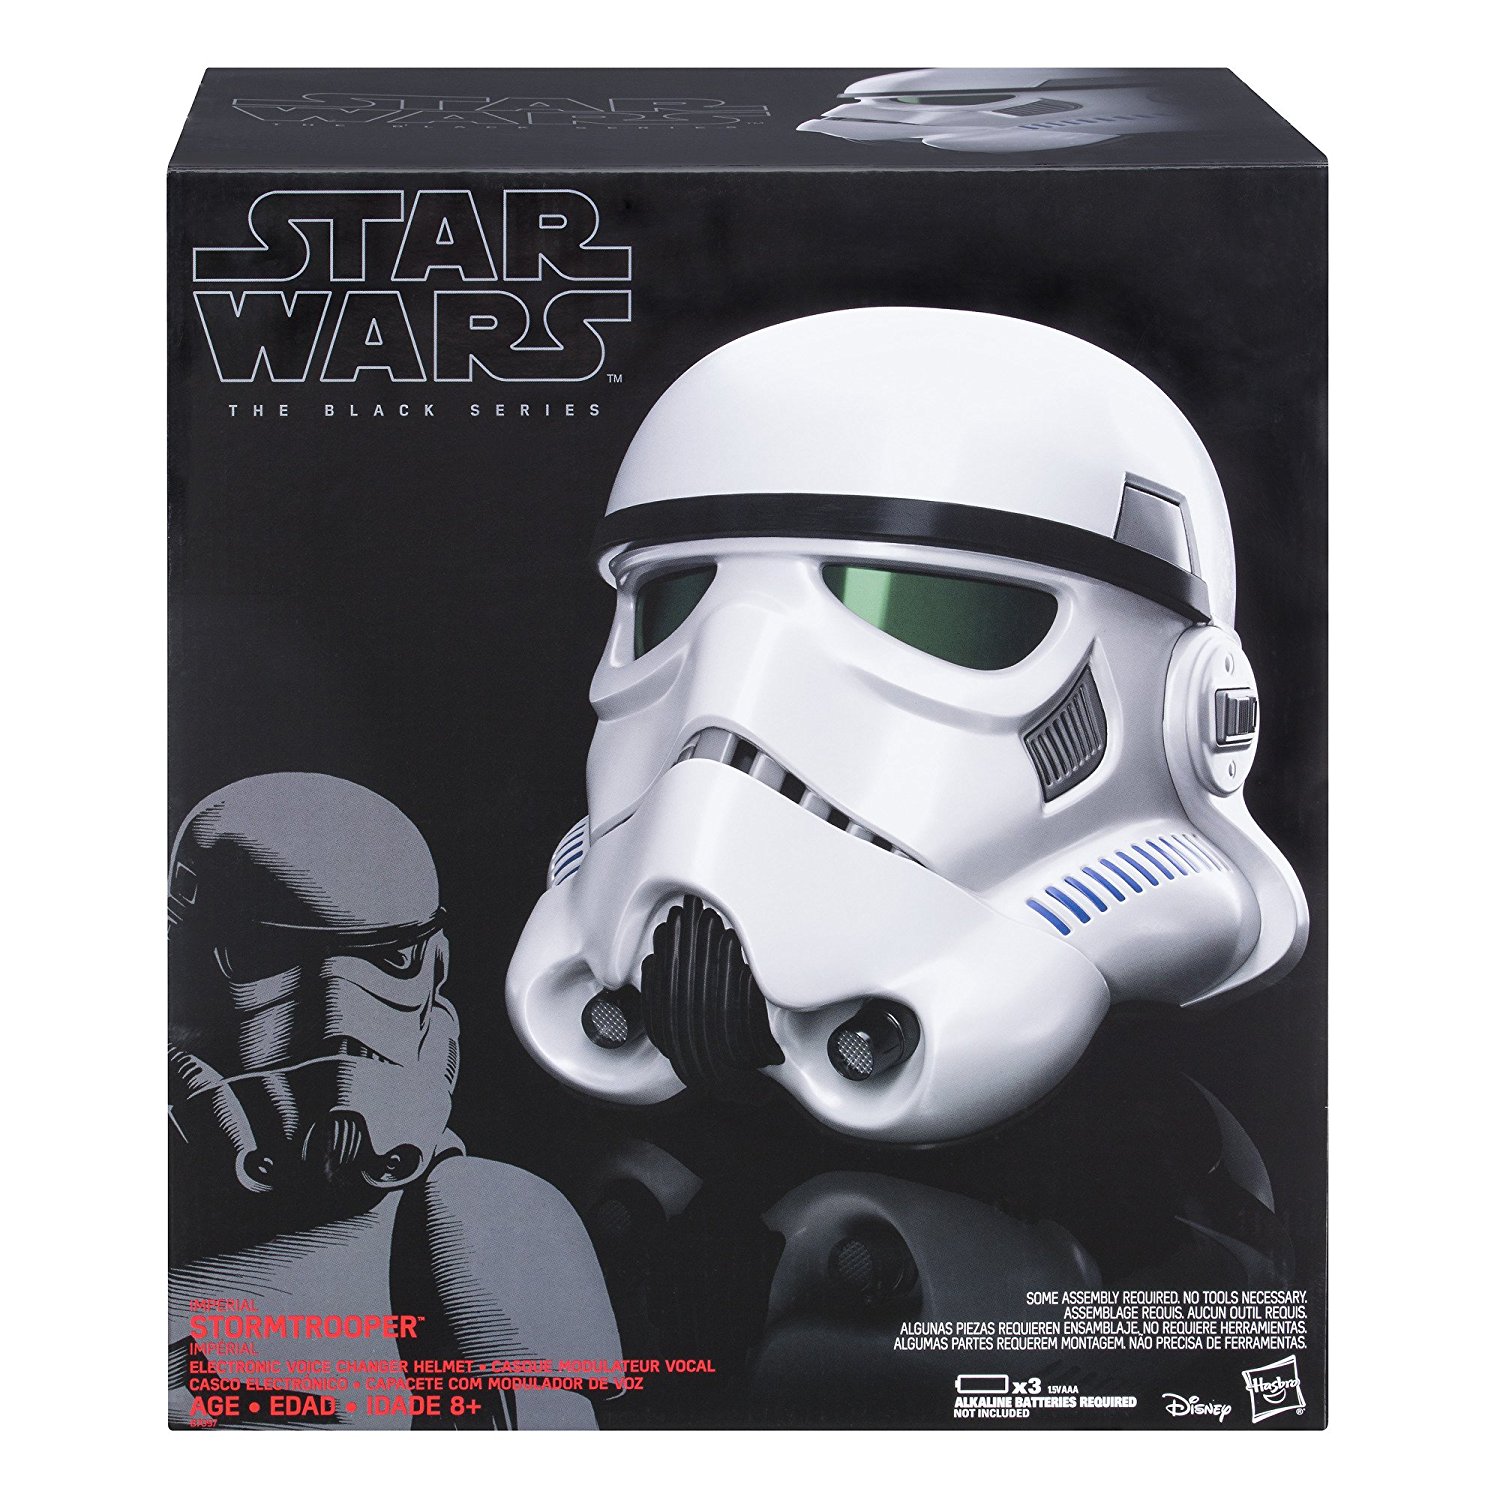 Amazon.com: Star Wars The Black Series Imperial Stormtrooper ...